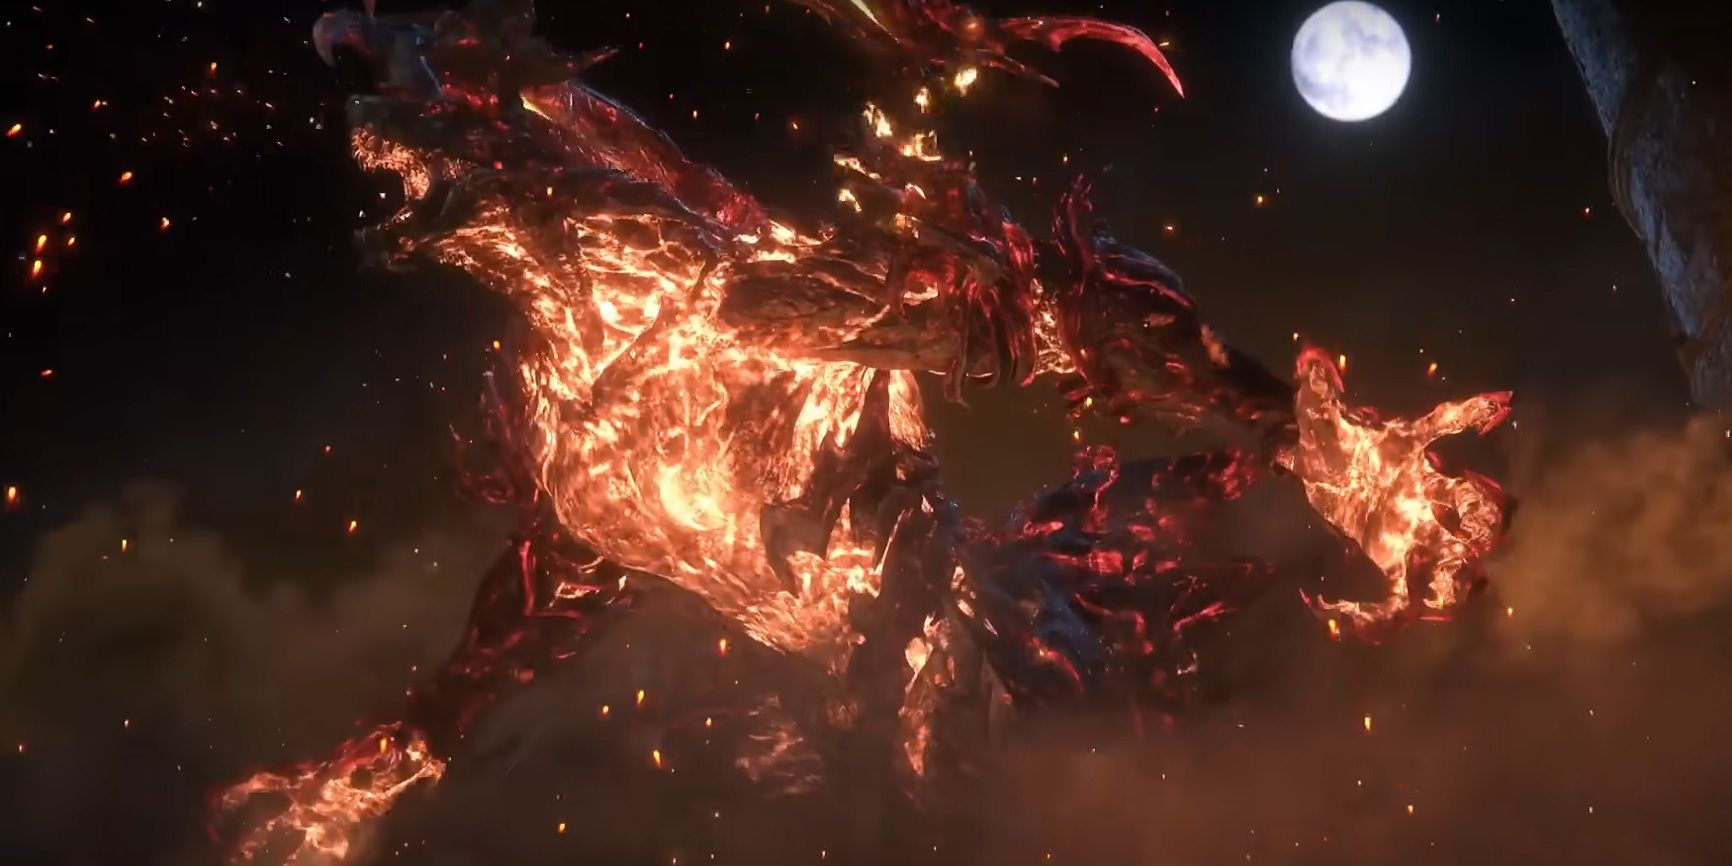 Final Fantasy 16's Eikon Ifrit, which looks like a flaming, almost draconic being, roaring into the night sky with a full moon in the background.